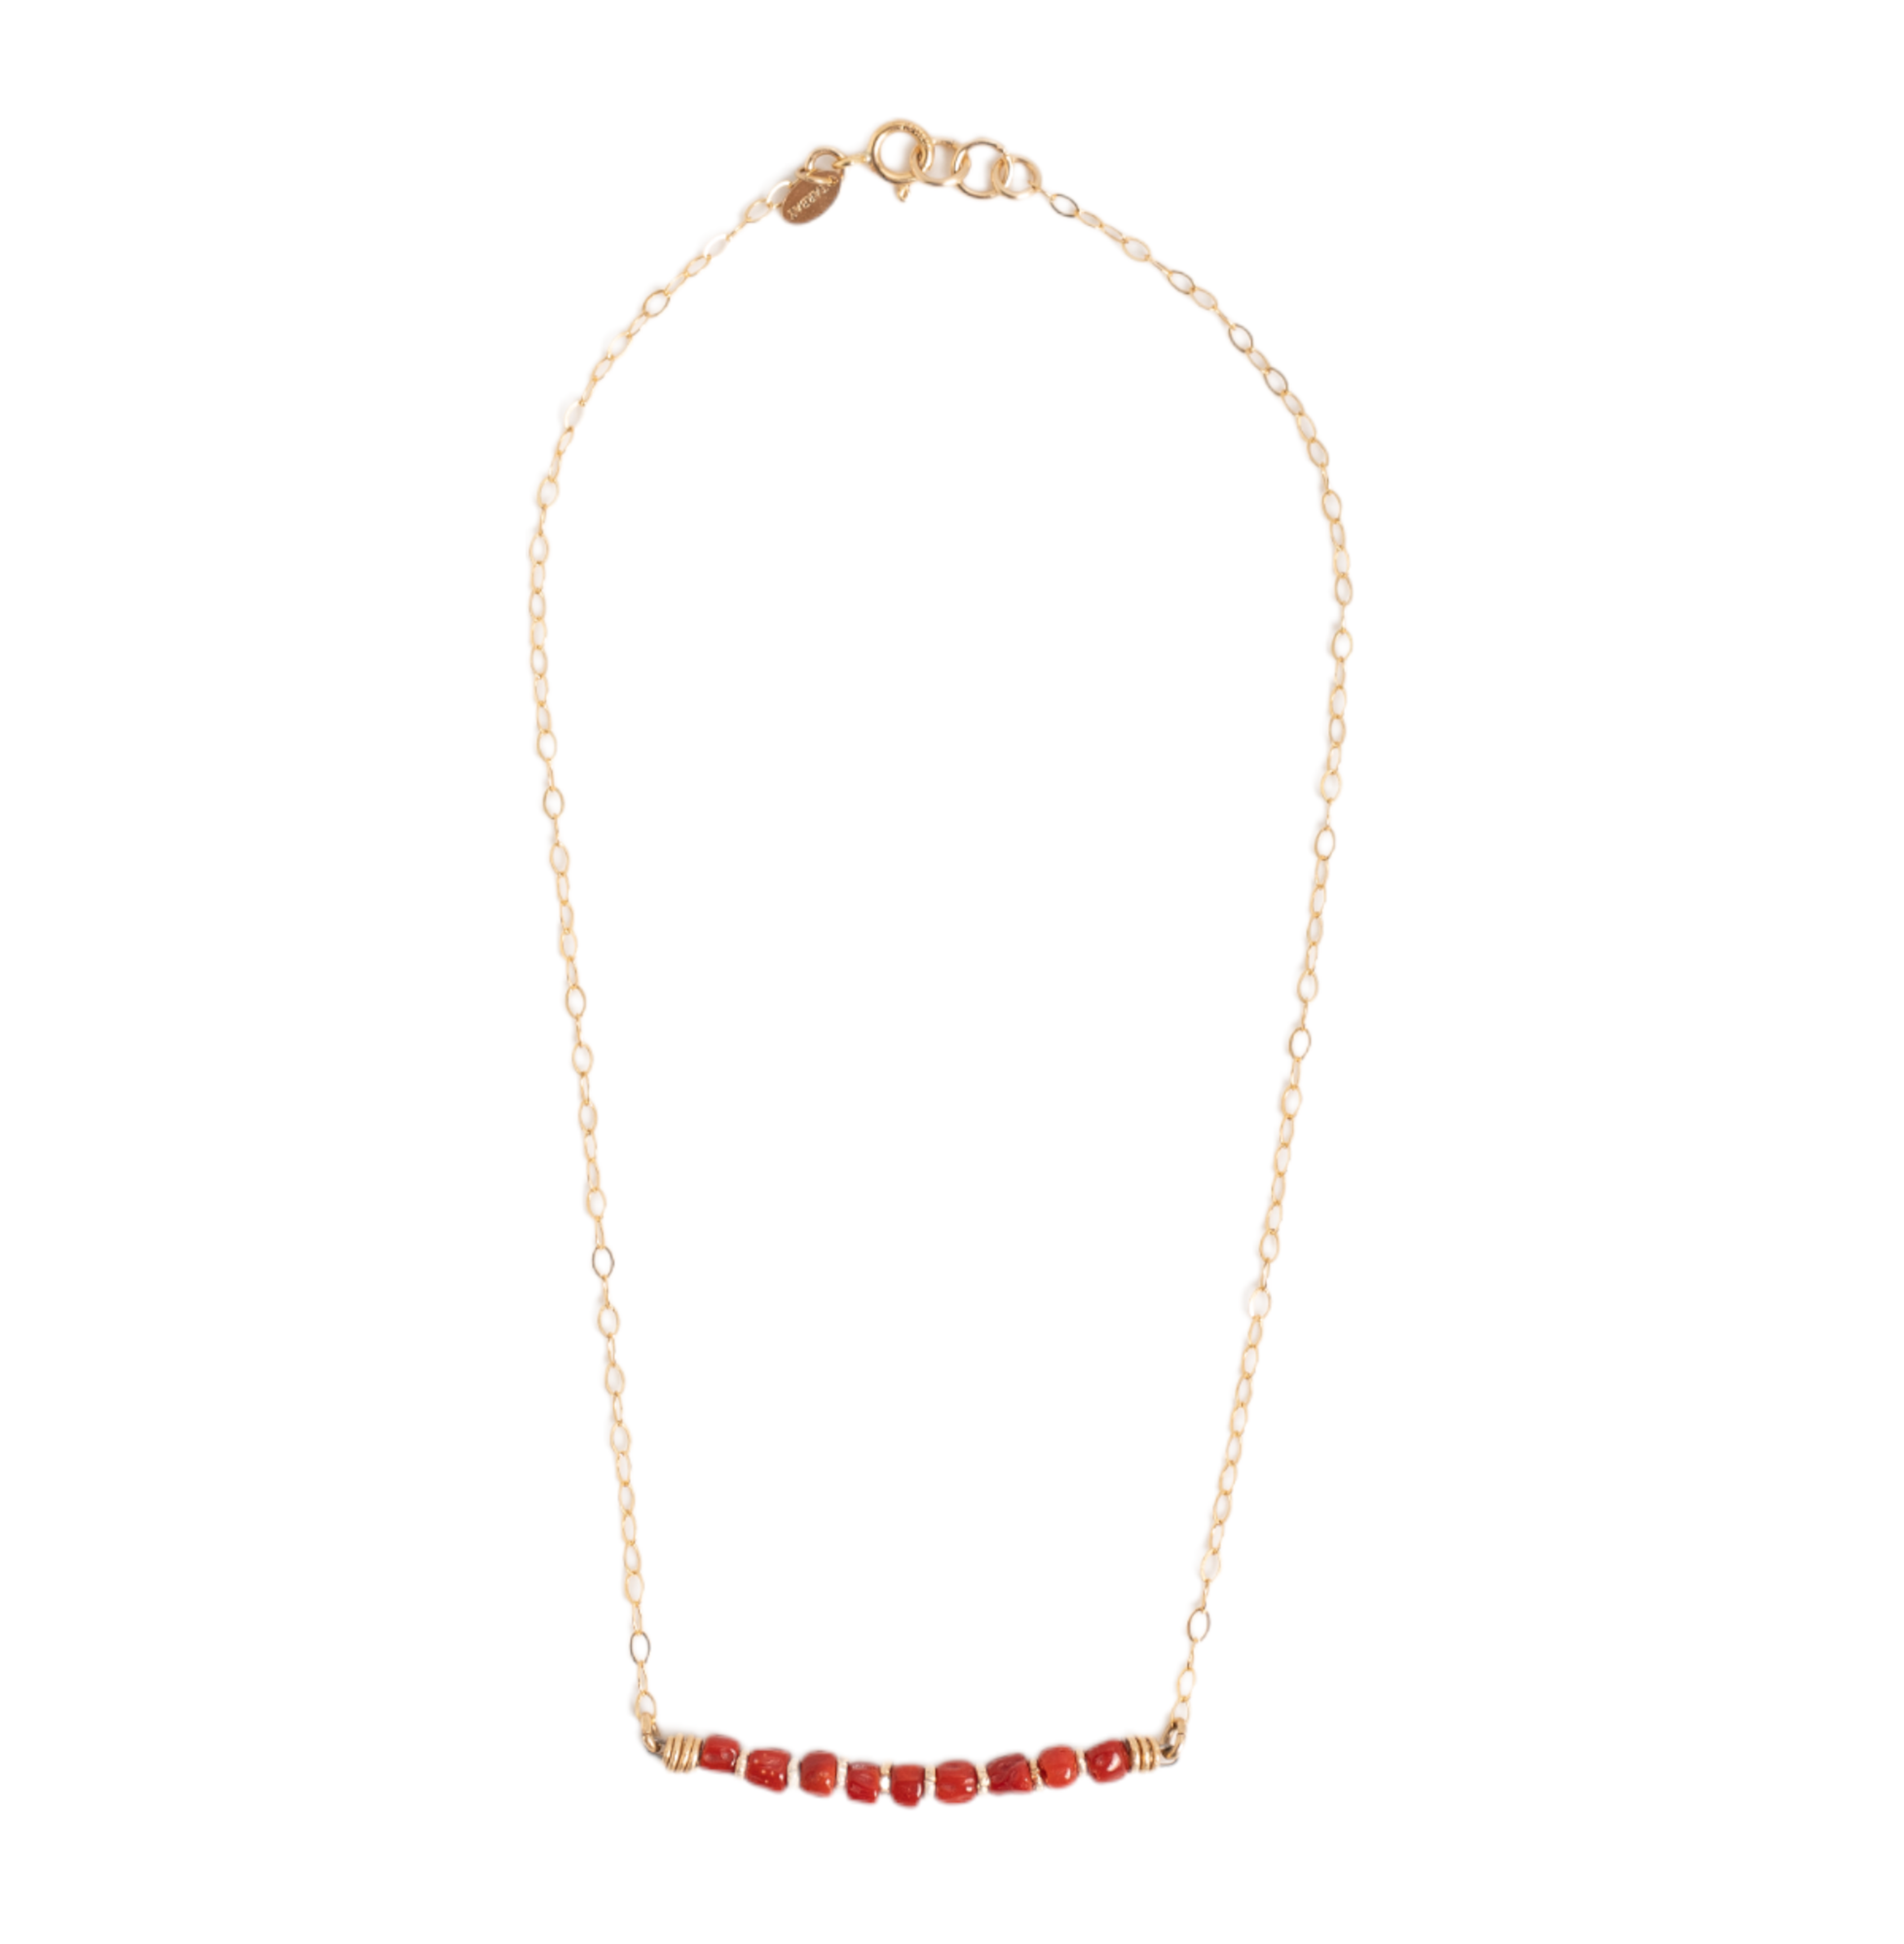 Koralli Necklace #2 - Red Coral Necklaces TARBAY   